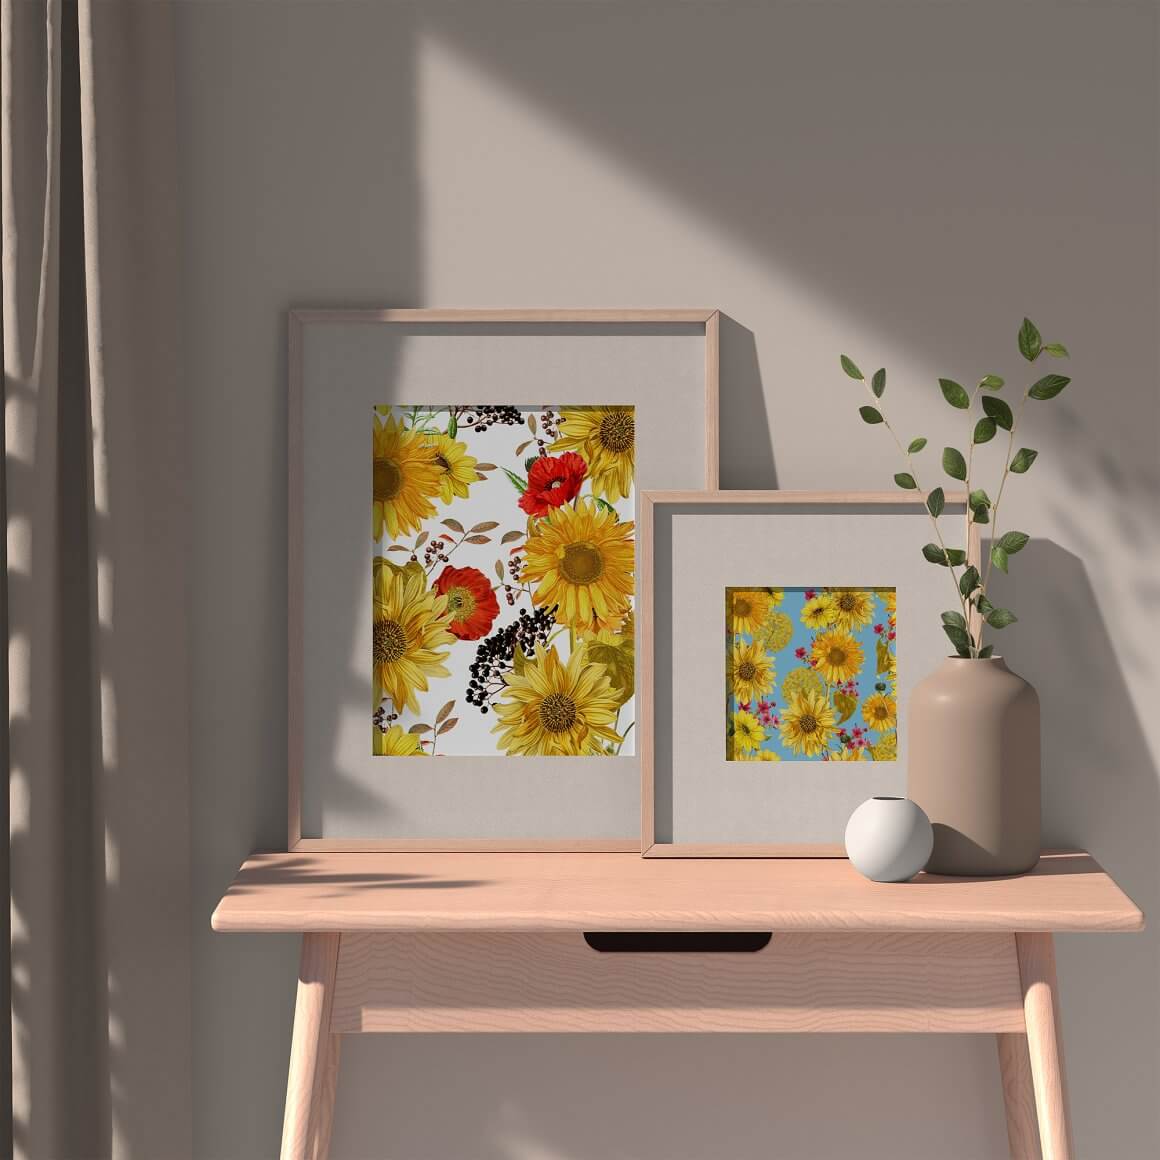 Two paintings with a white and blue background depicting sunflowers.